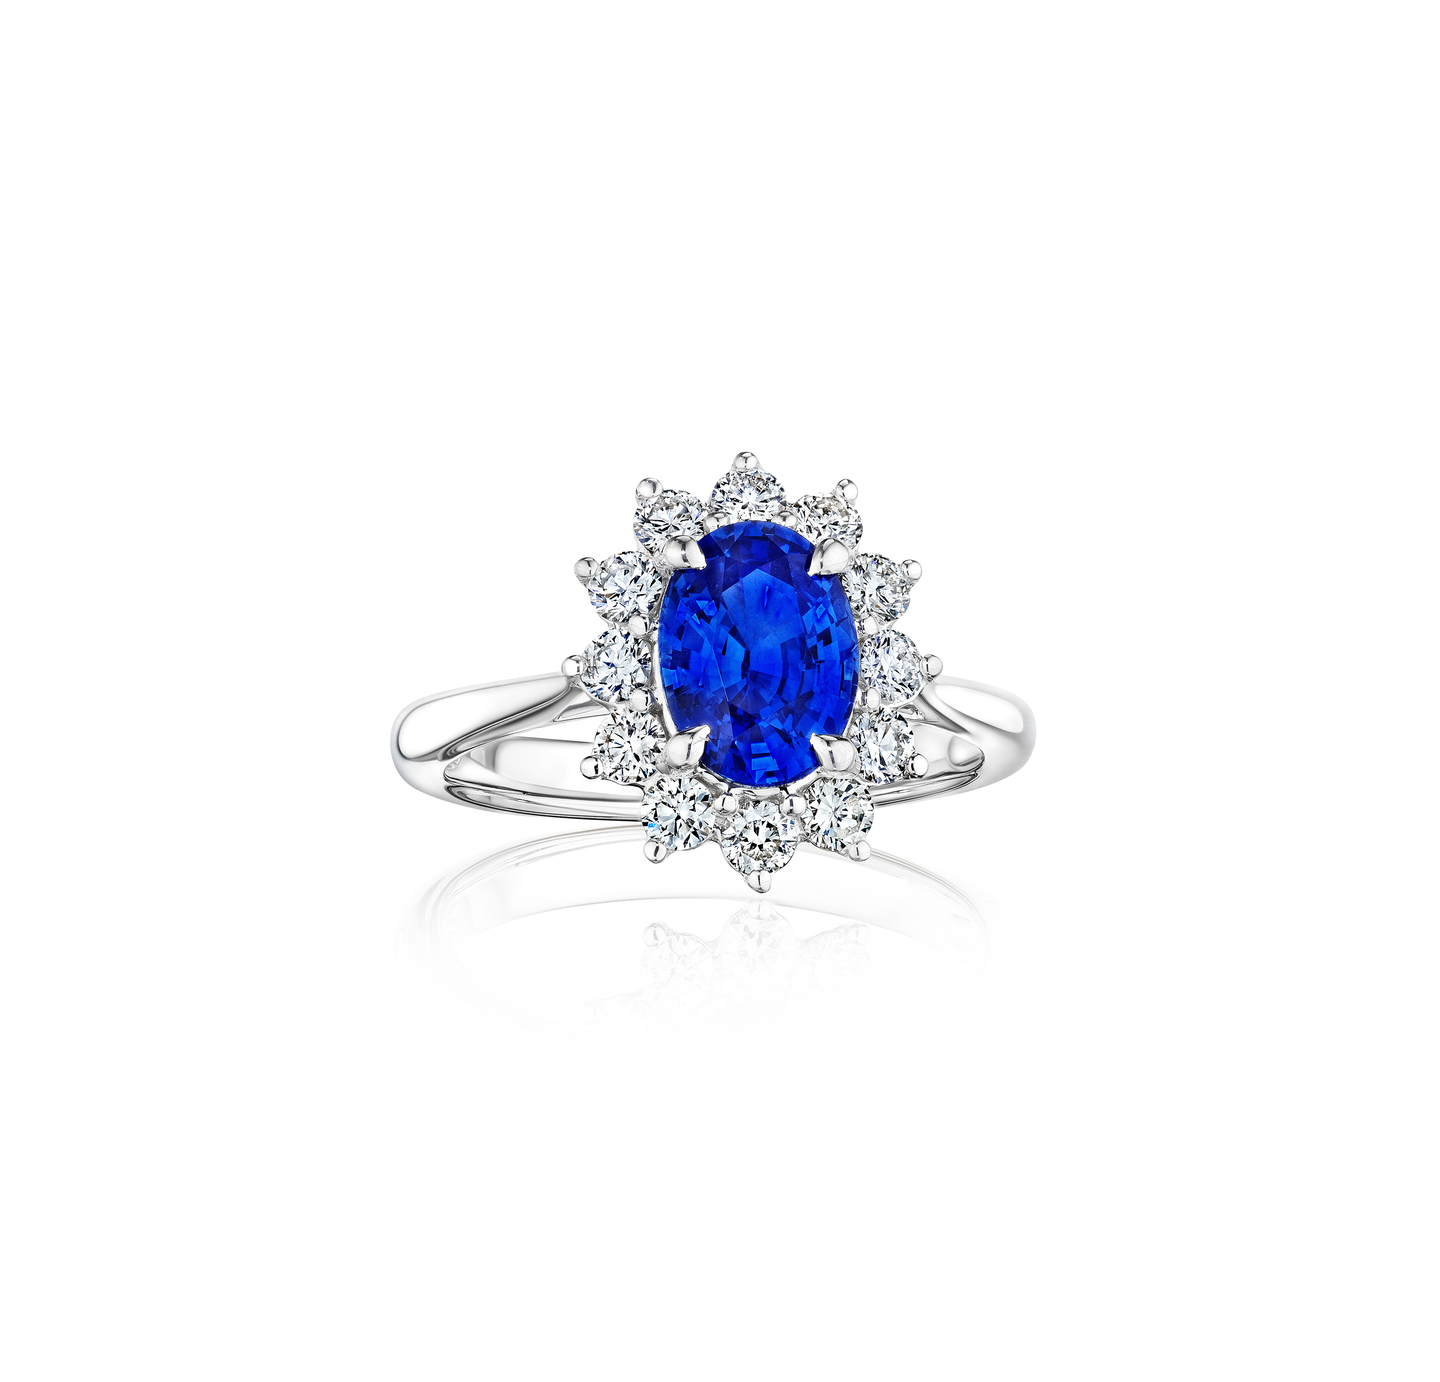 Sabel Collection White Gold Sapphire and Diamond Sunburst Ring